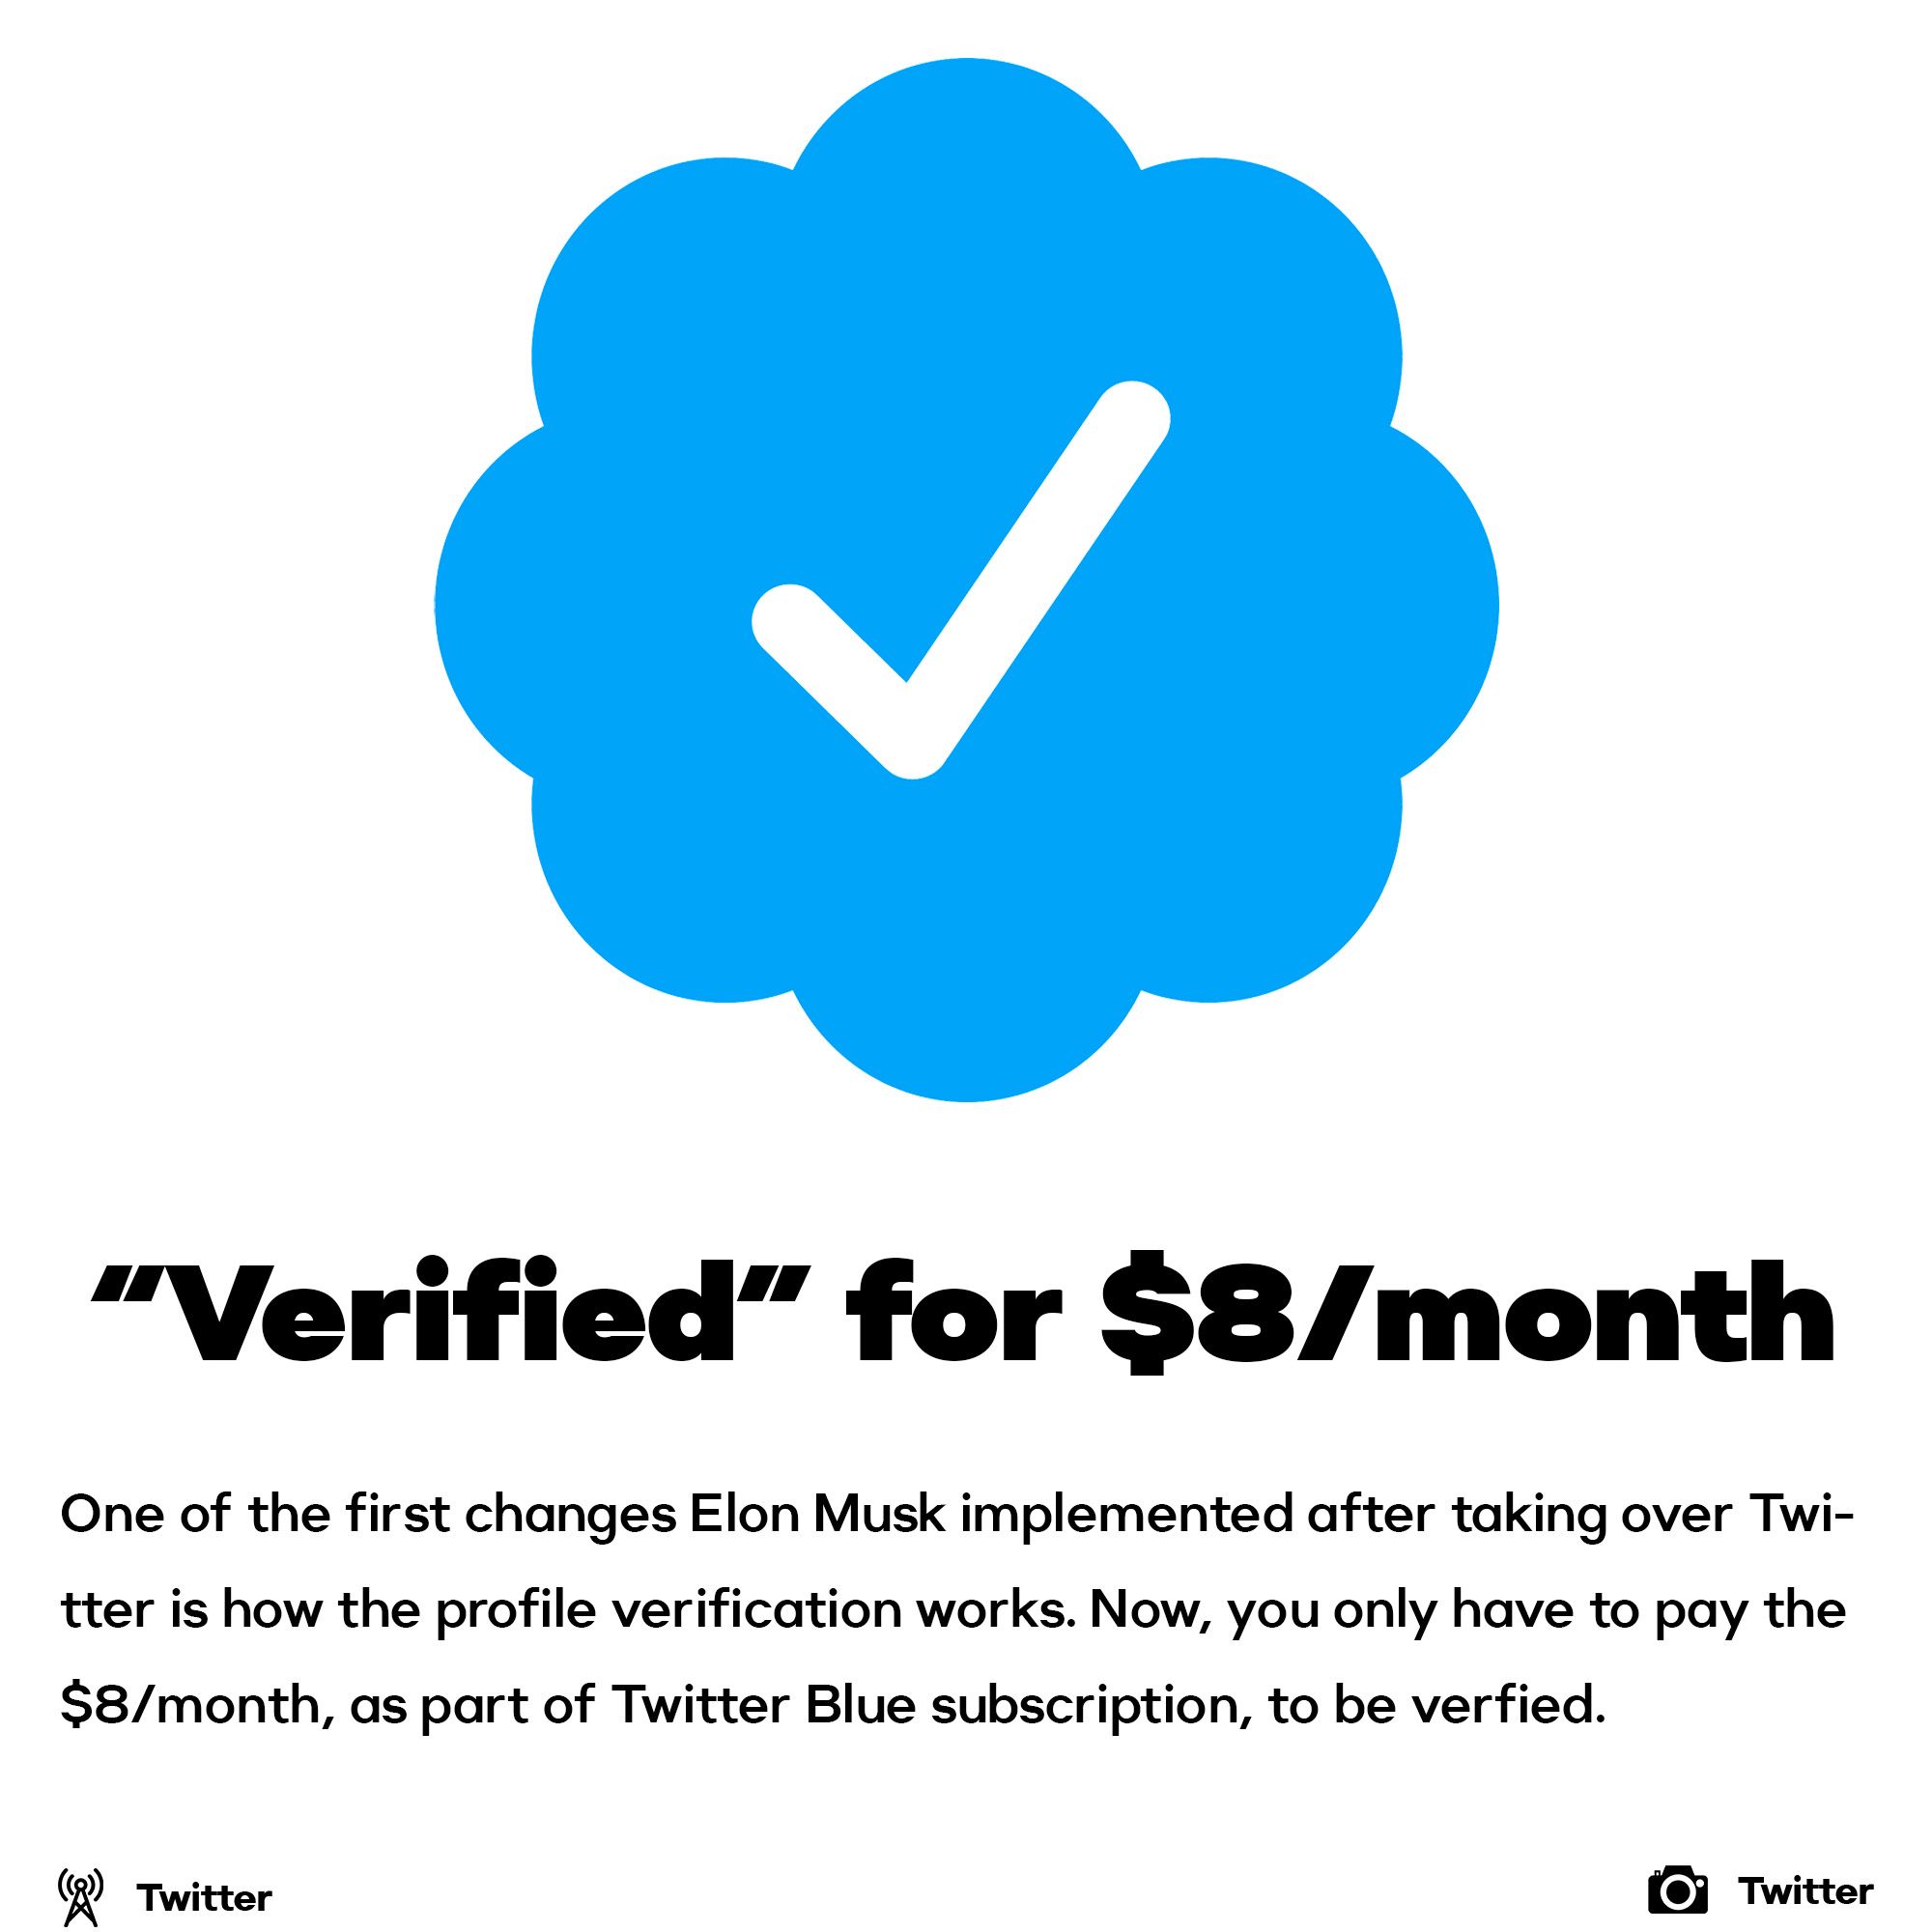 Twitter verification as a subscription